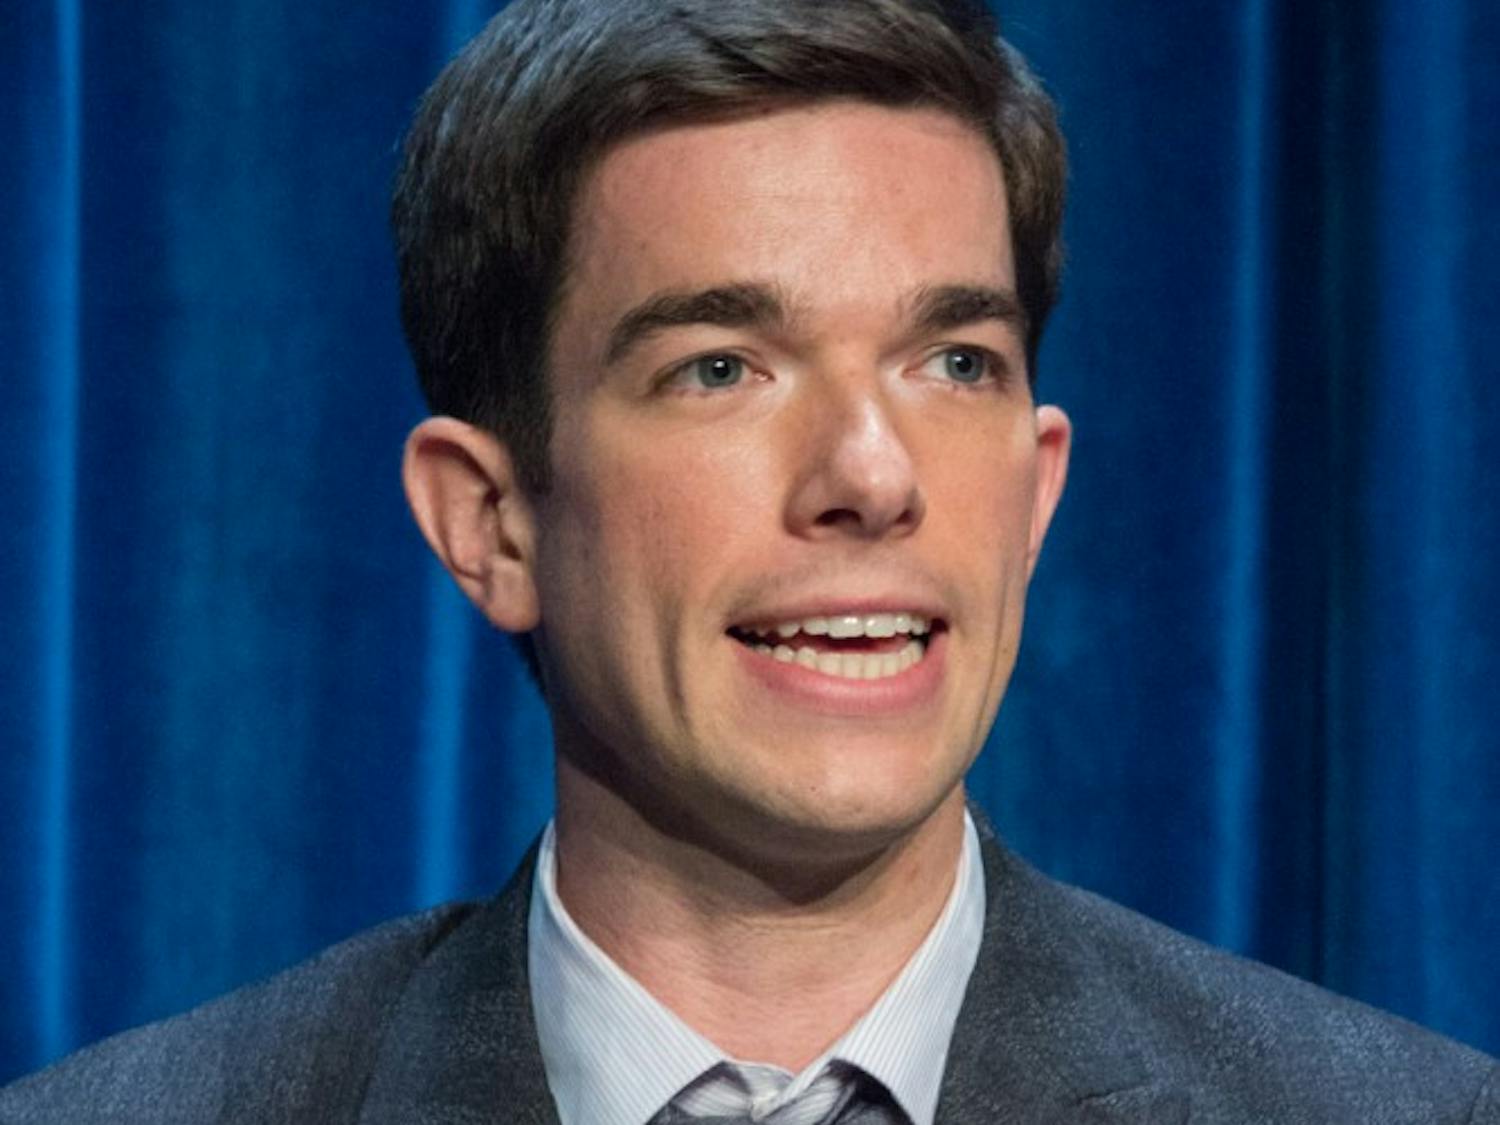 Big Mouth co-star and writer John Mulaney will headline this year's SA Comedy Series on Feb. 16. Undergraduates can reserve their tickets beginning Feb. 4 at 10 a.m.